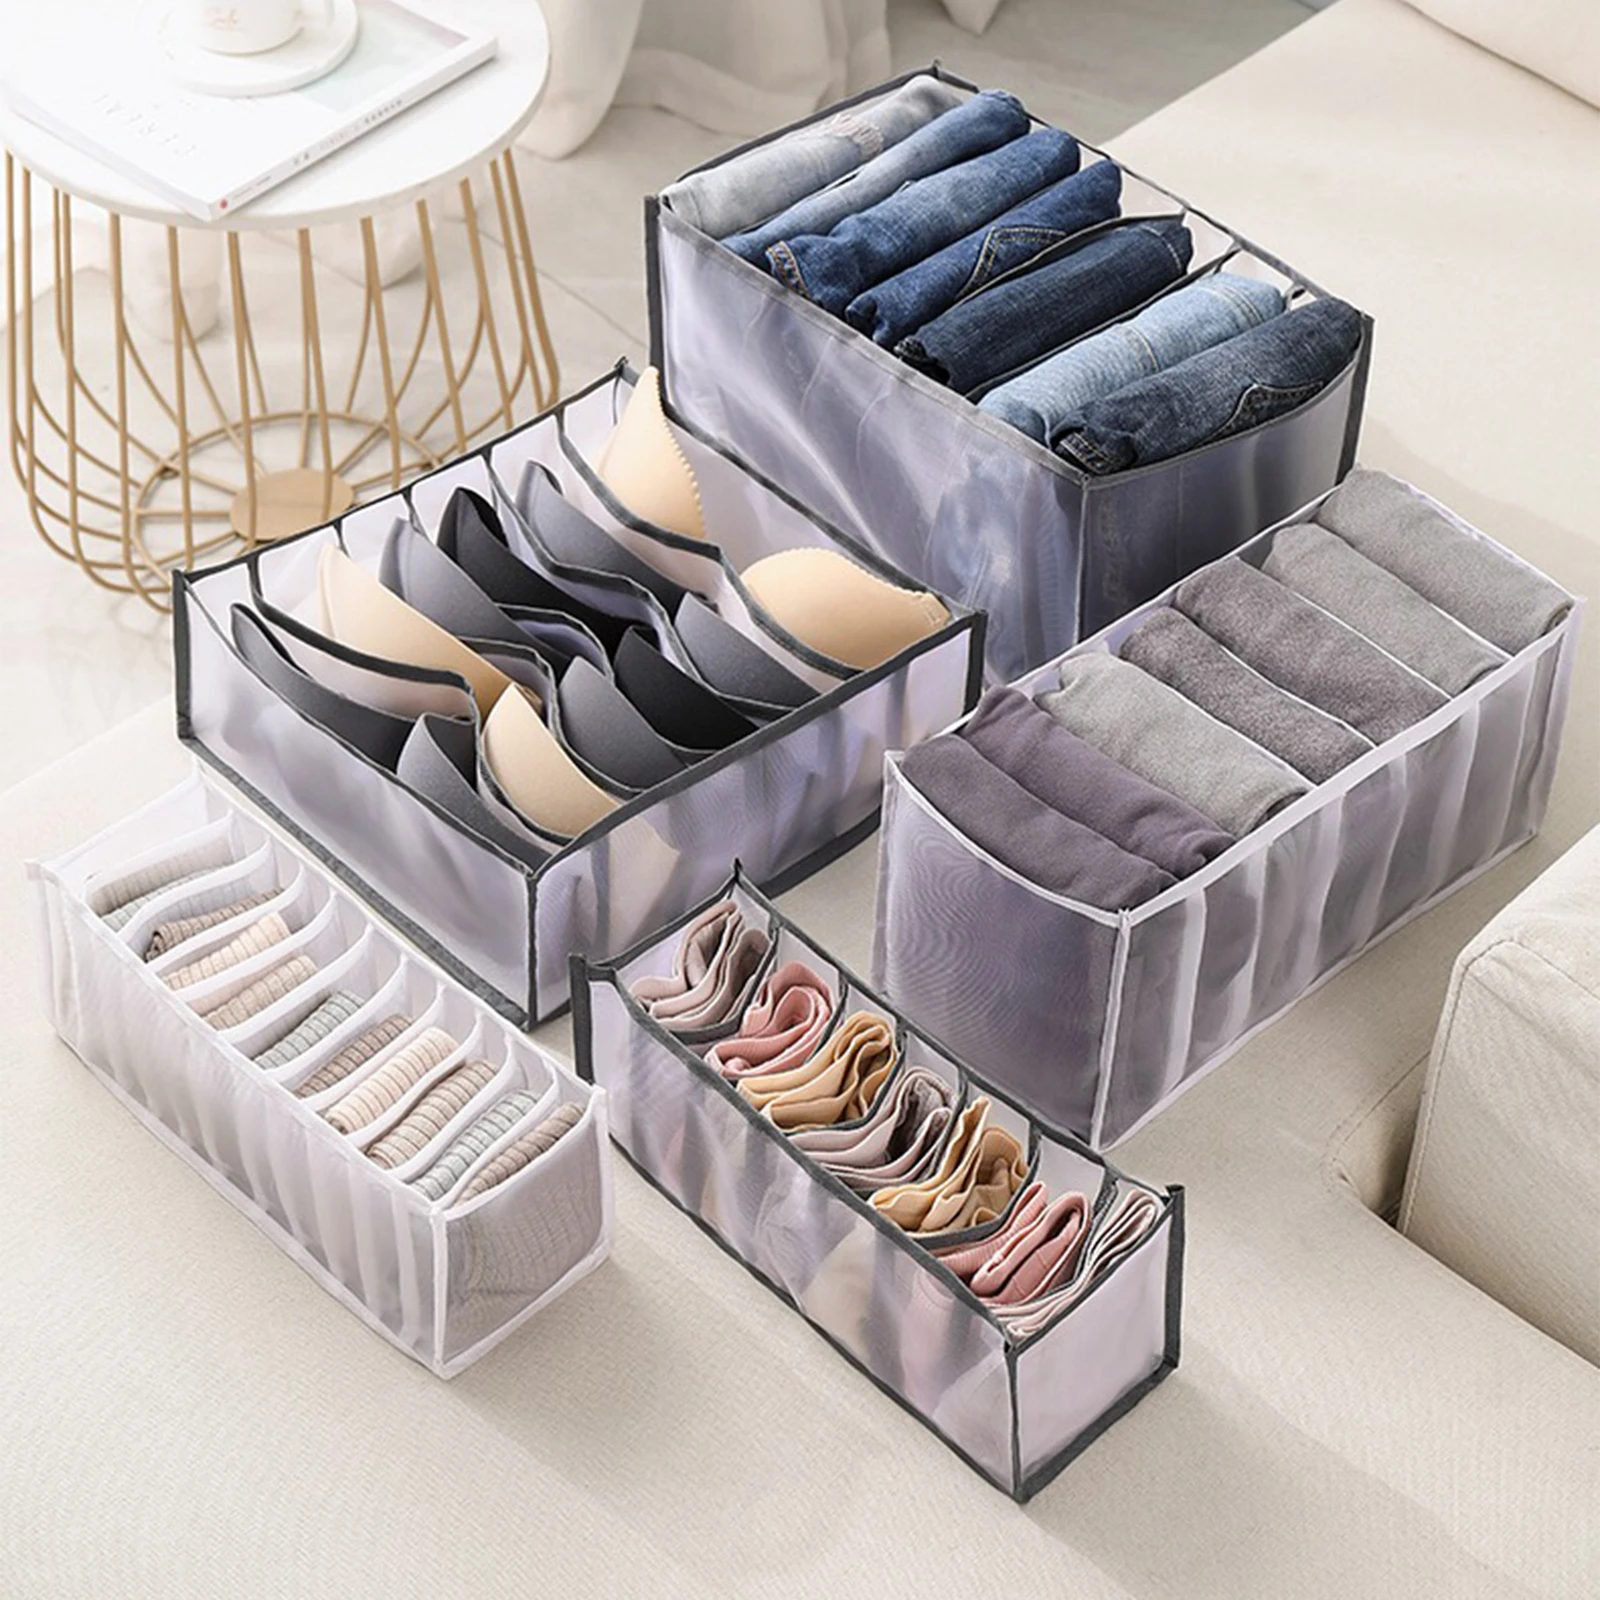 7/9 Grids Washable Jeans Compartment Storage Box Closet Clothes Drawer Mesh Separation Box Stacking Pants Storage Artifact